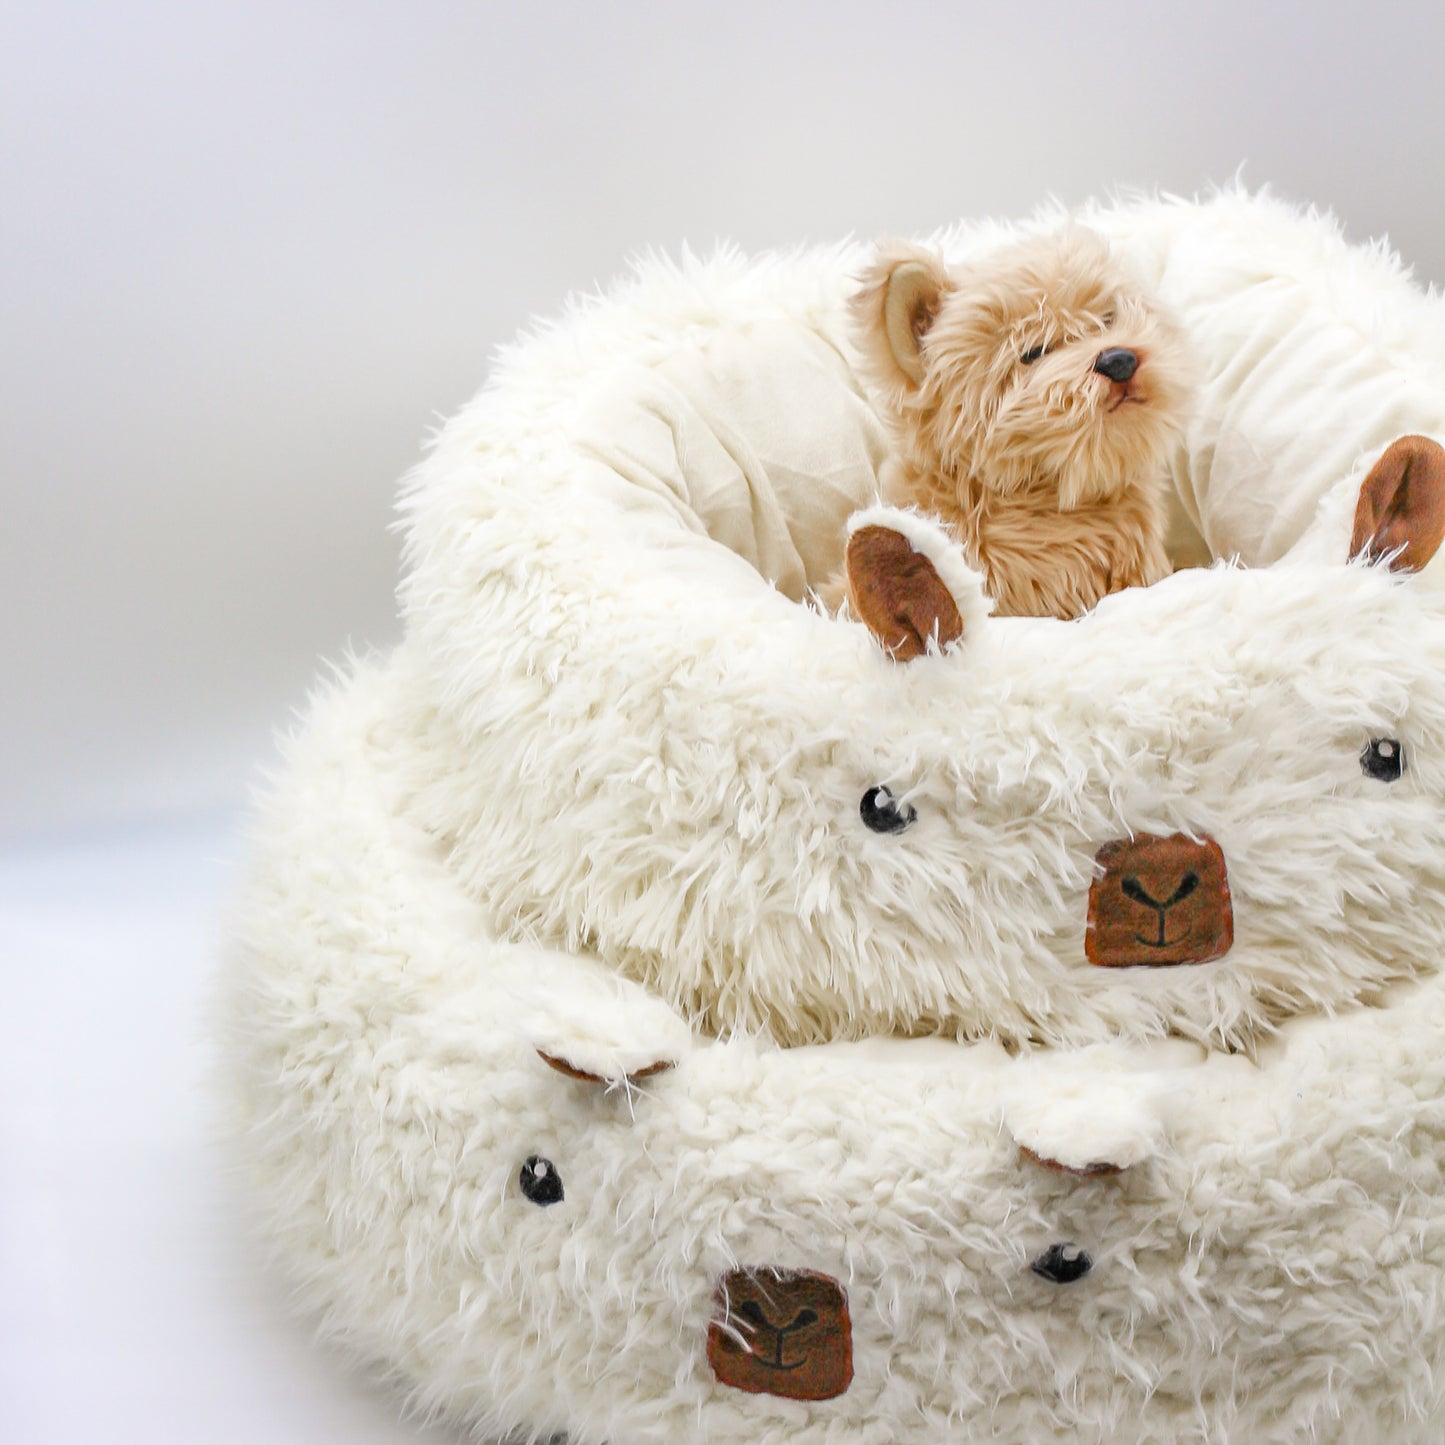 sherpa faux fur plush dog cat bed insert washable dog bed pillow small medium large alpaca llama bed for pets bop pop pets accessories 20in 24in diameter